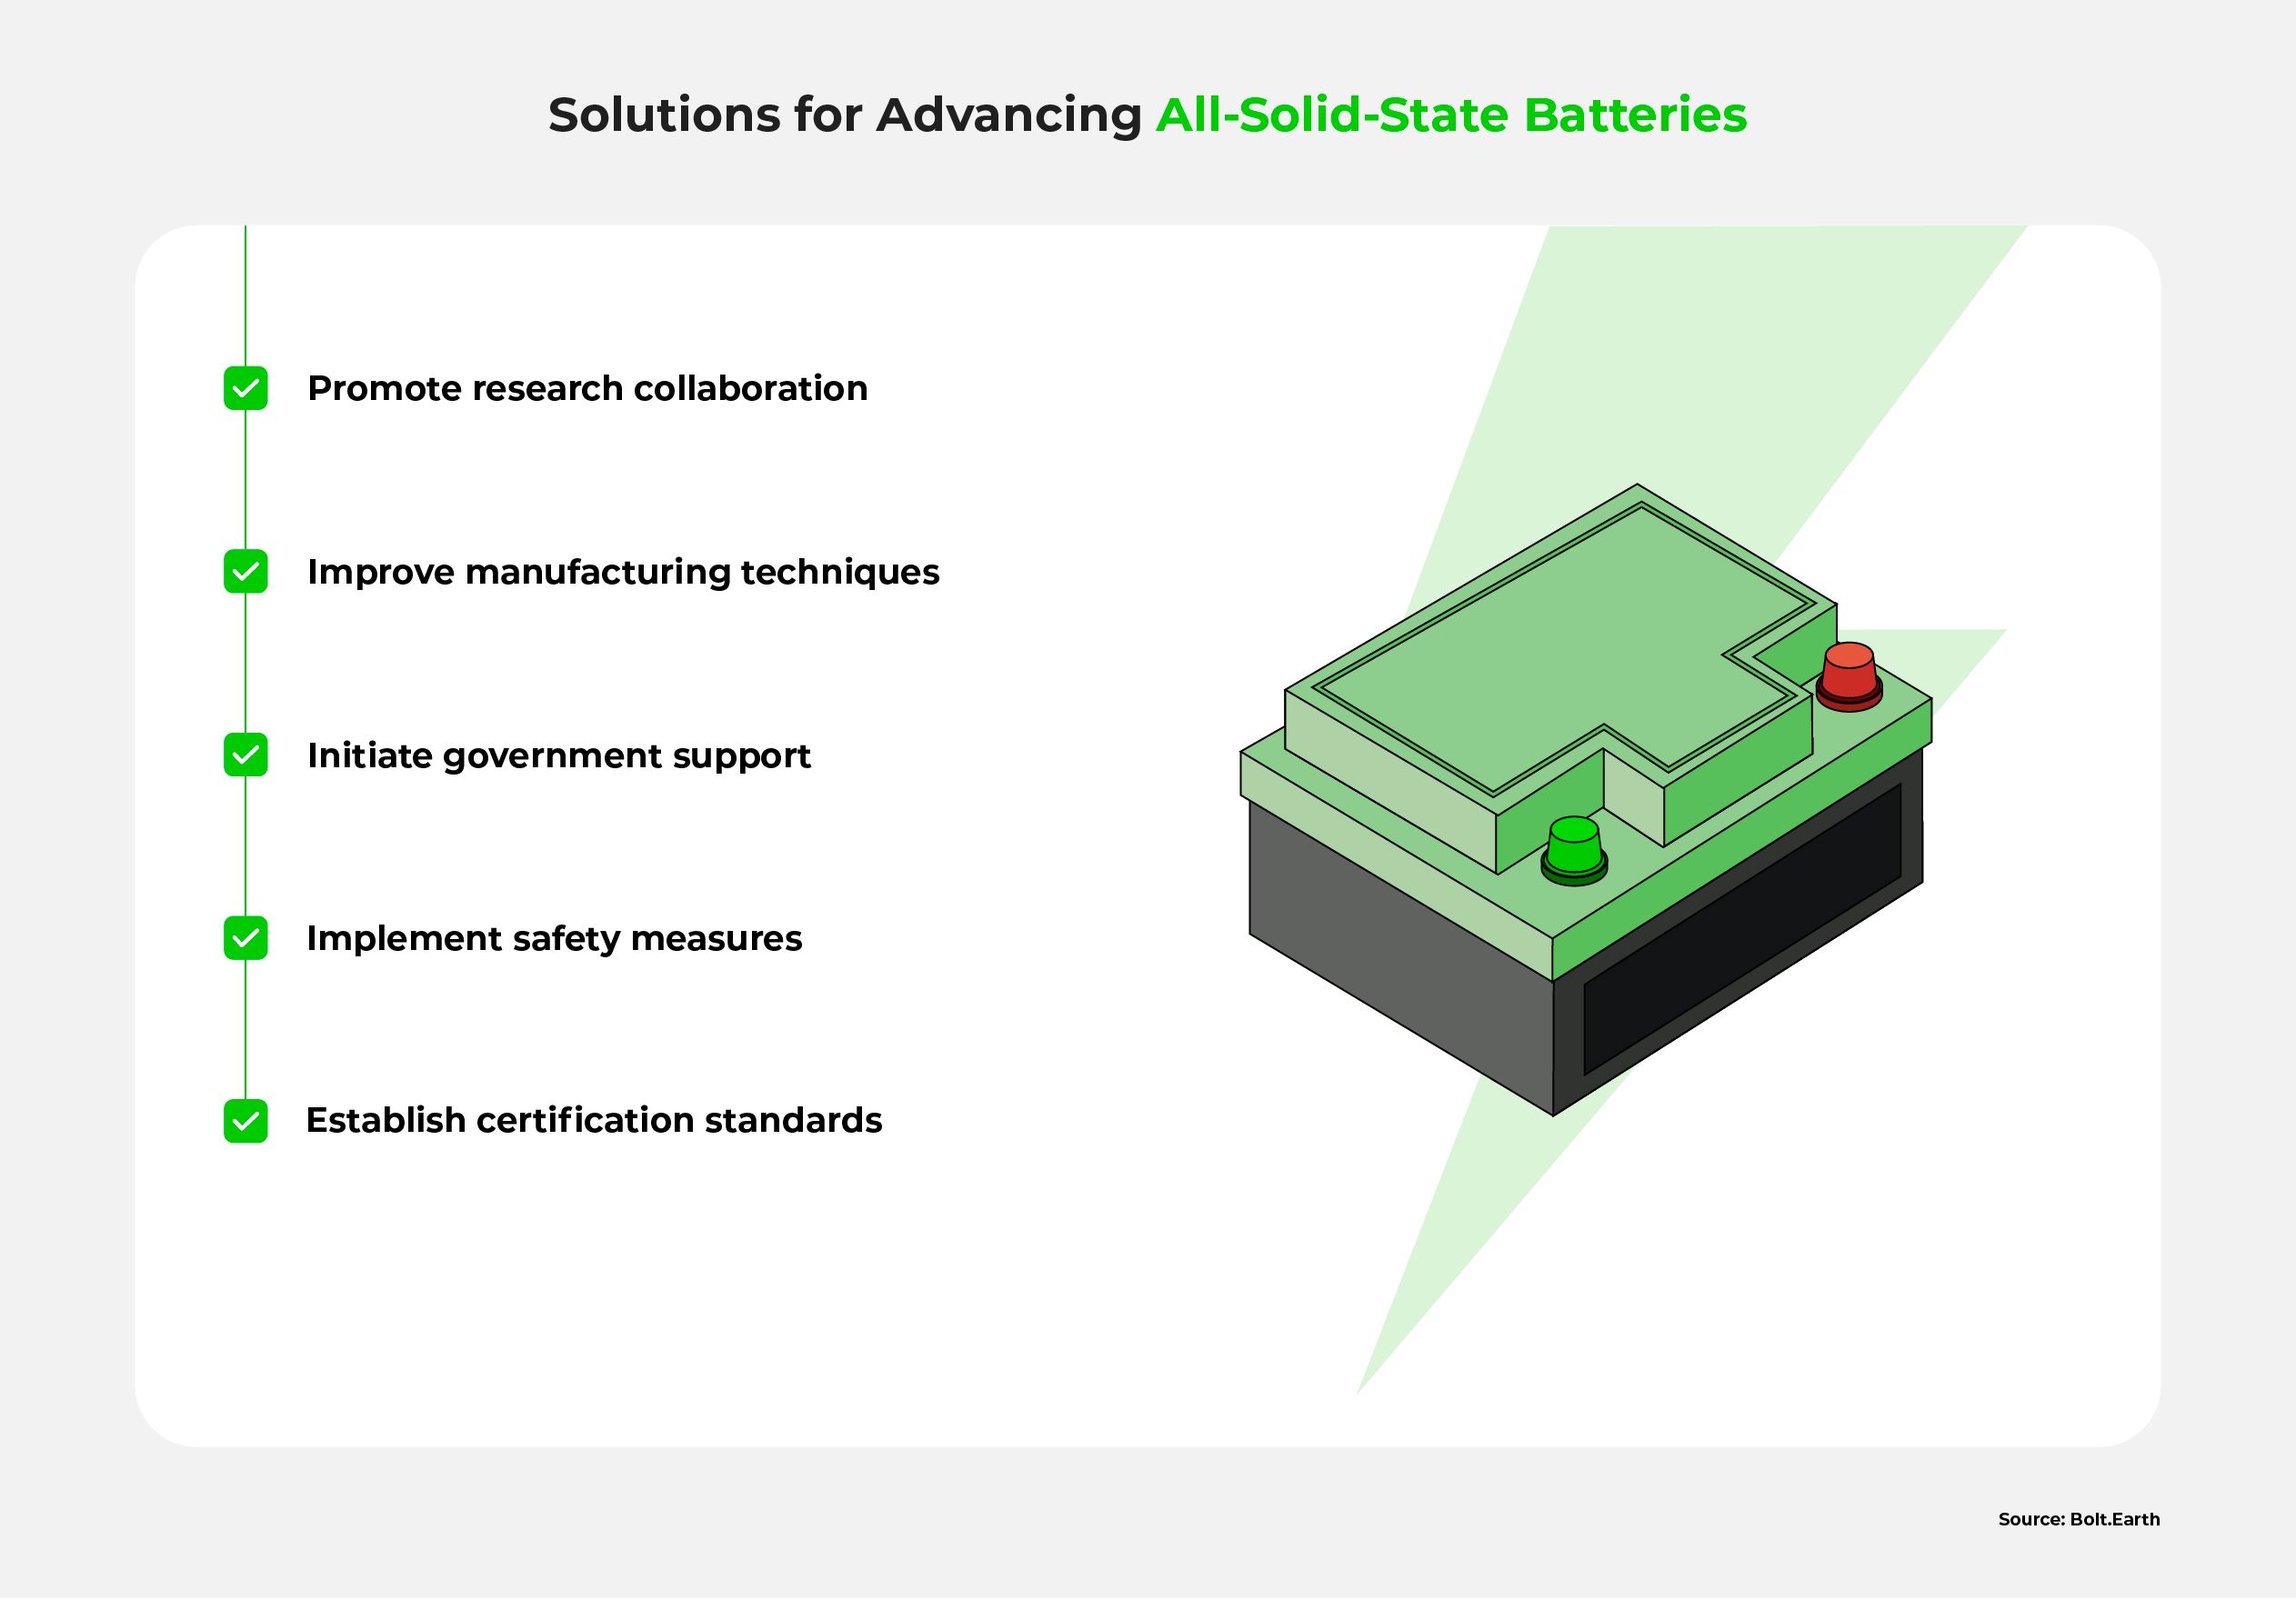 A list of solutions to help advance all-solid-state battery technology